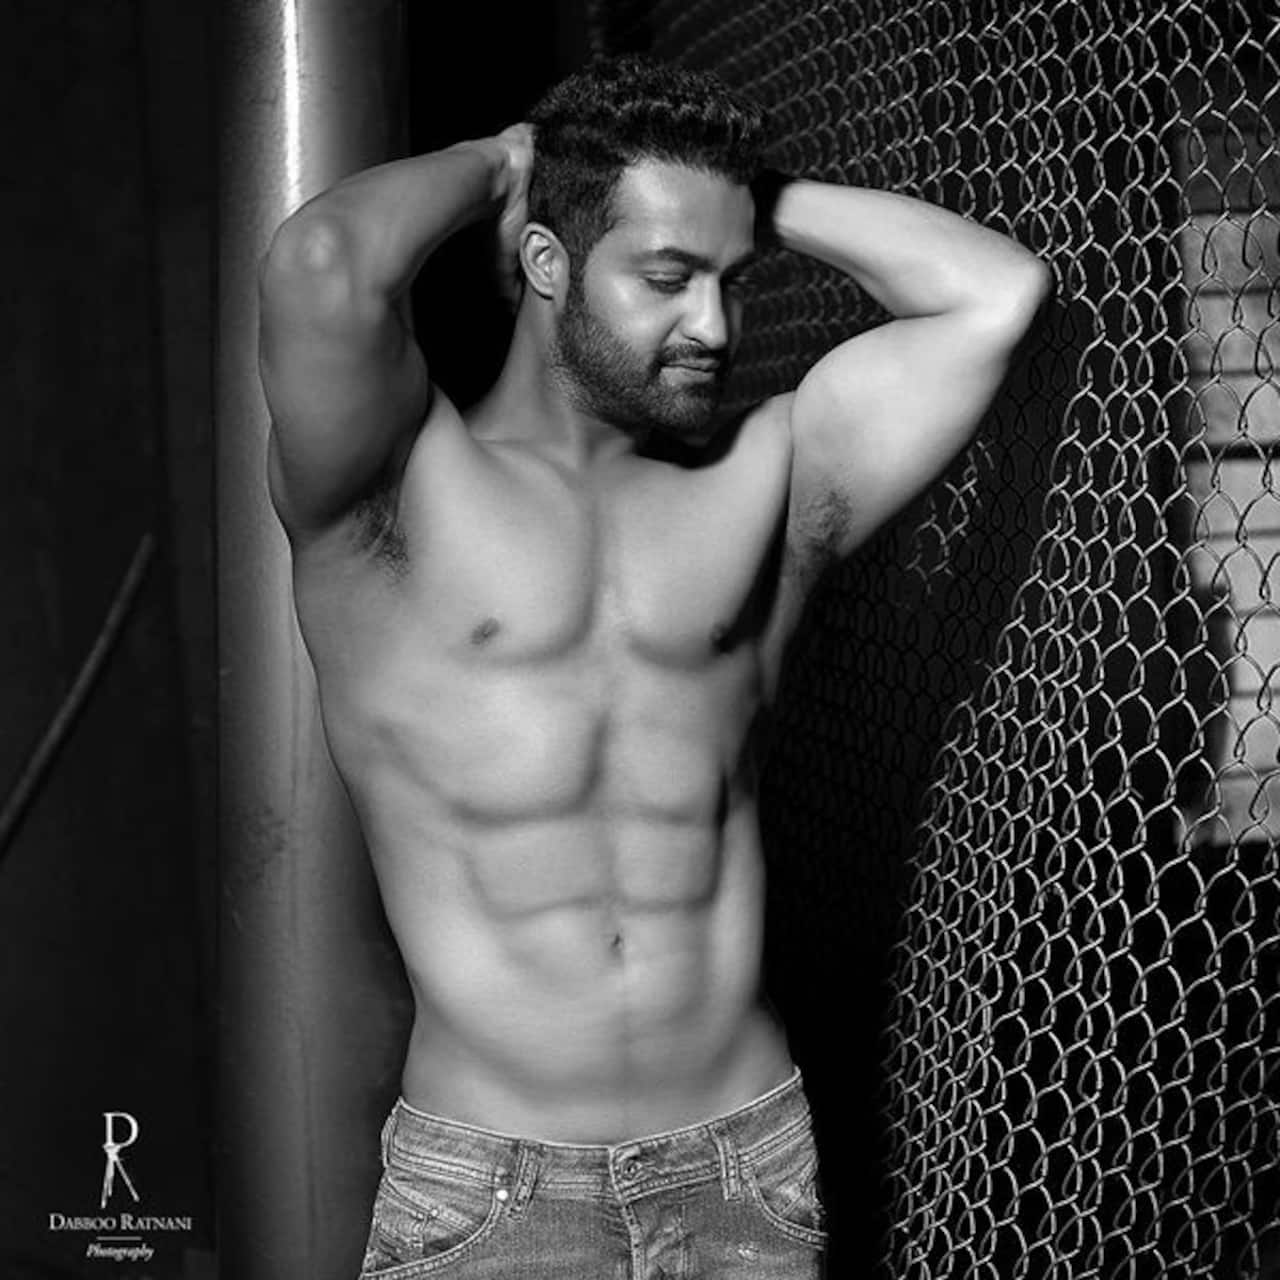 RRR actor Jr NTR trolled for his ‘nakli’ washboard abs